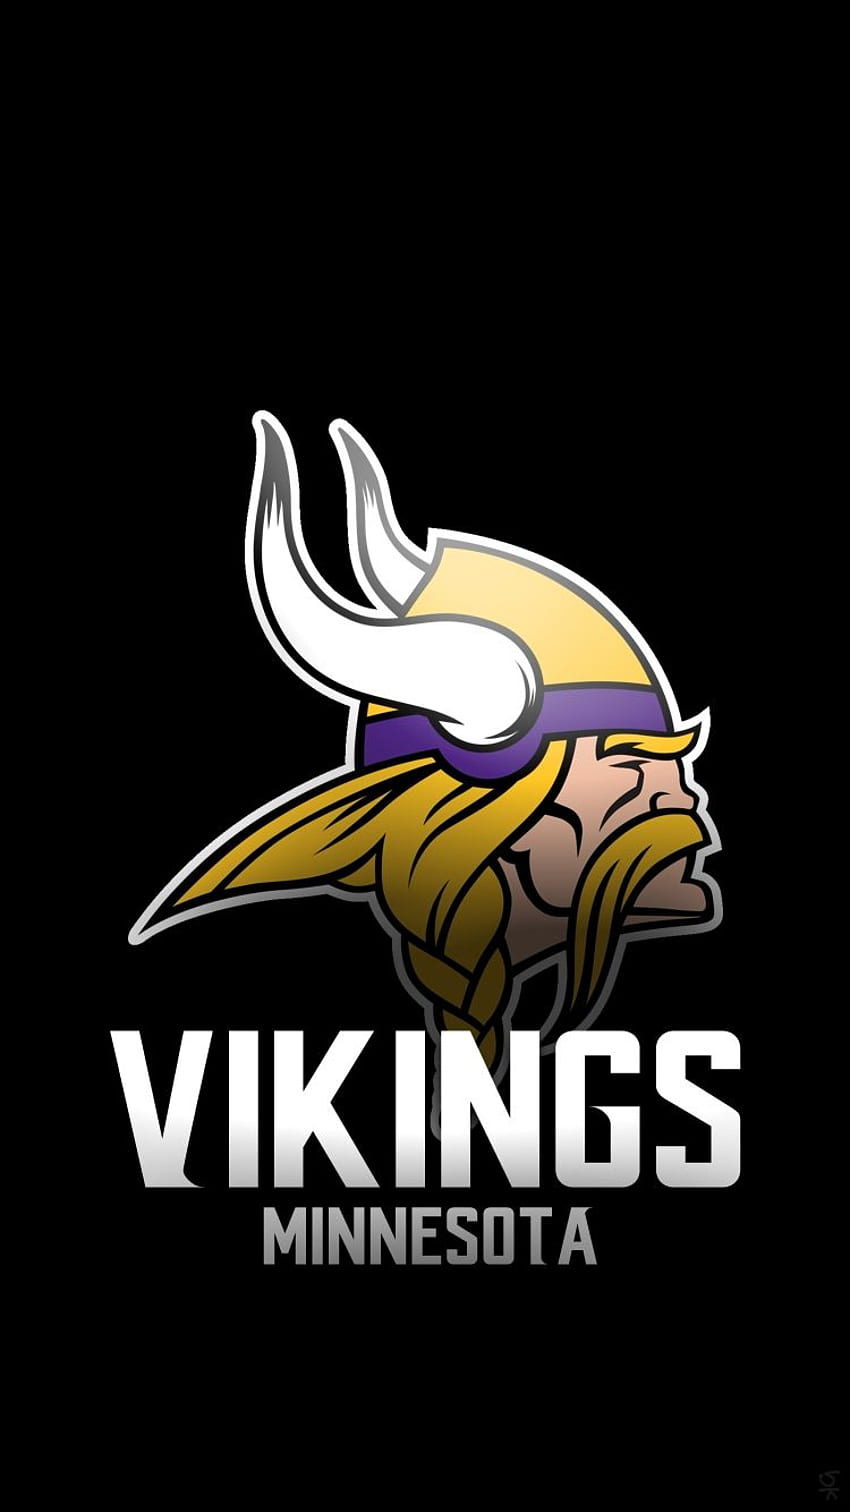 Share more than 55 minnesota vikings iphone wallpaper best - in.cdgdbentre